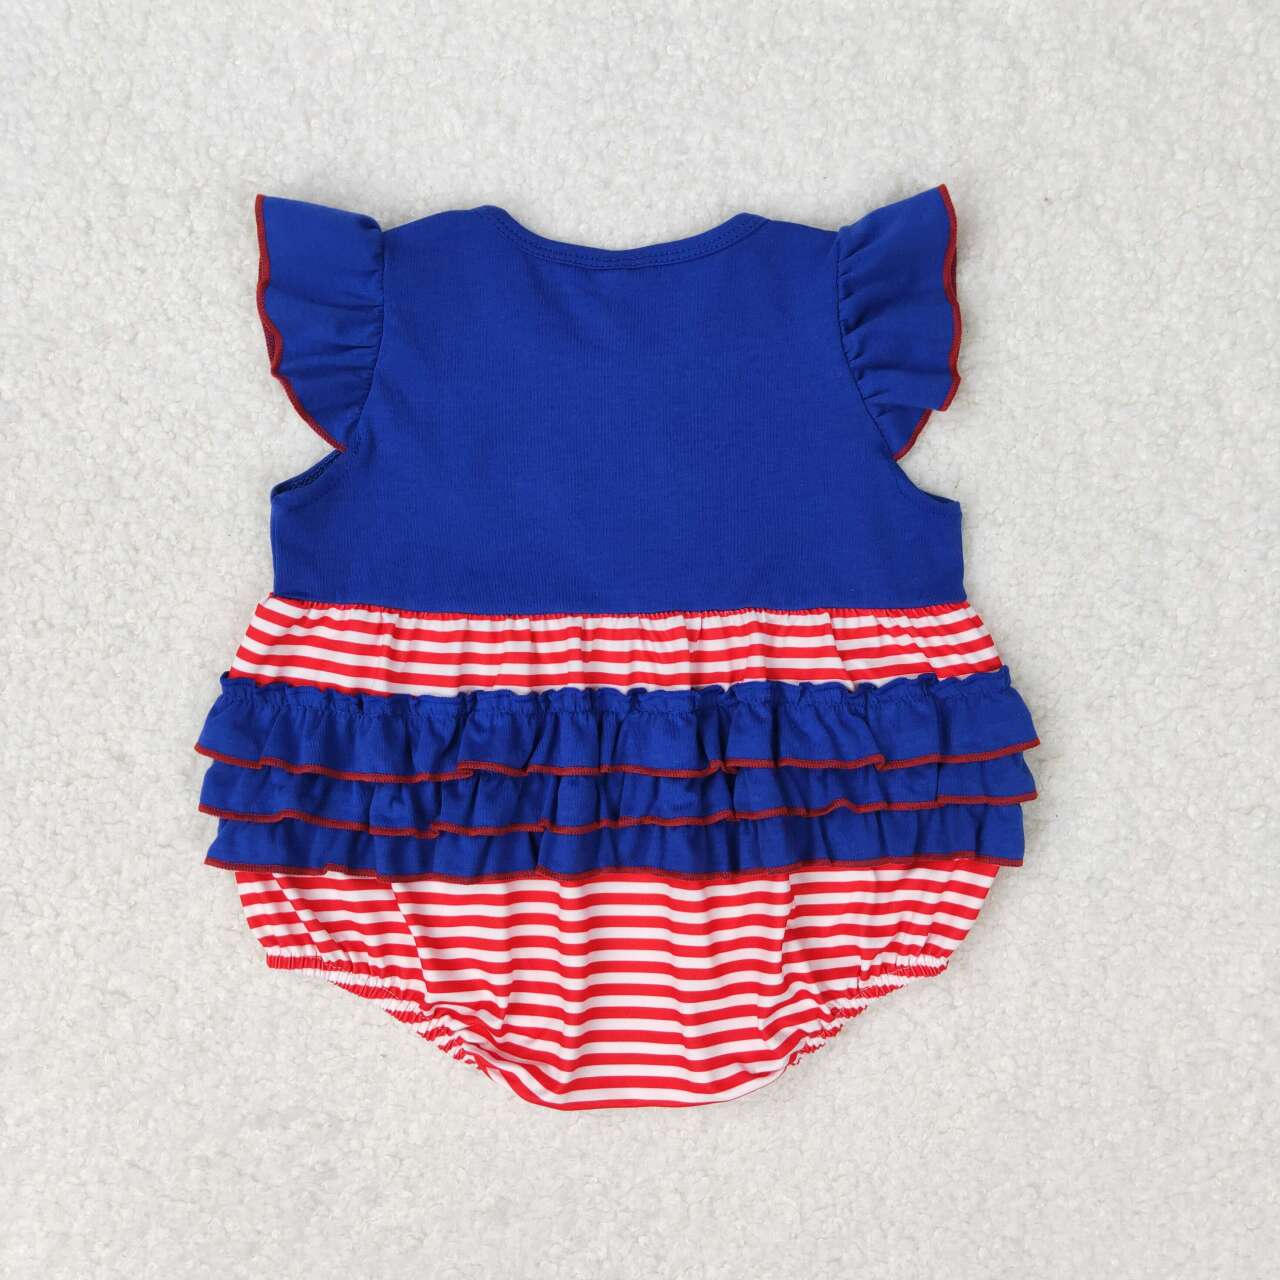 SR1211 Flags Embroidery Red Stripes Baby Girls 4th of July Bubble Romper